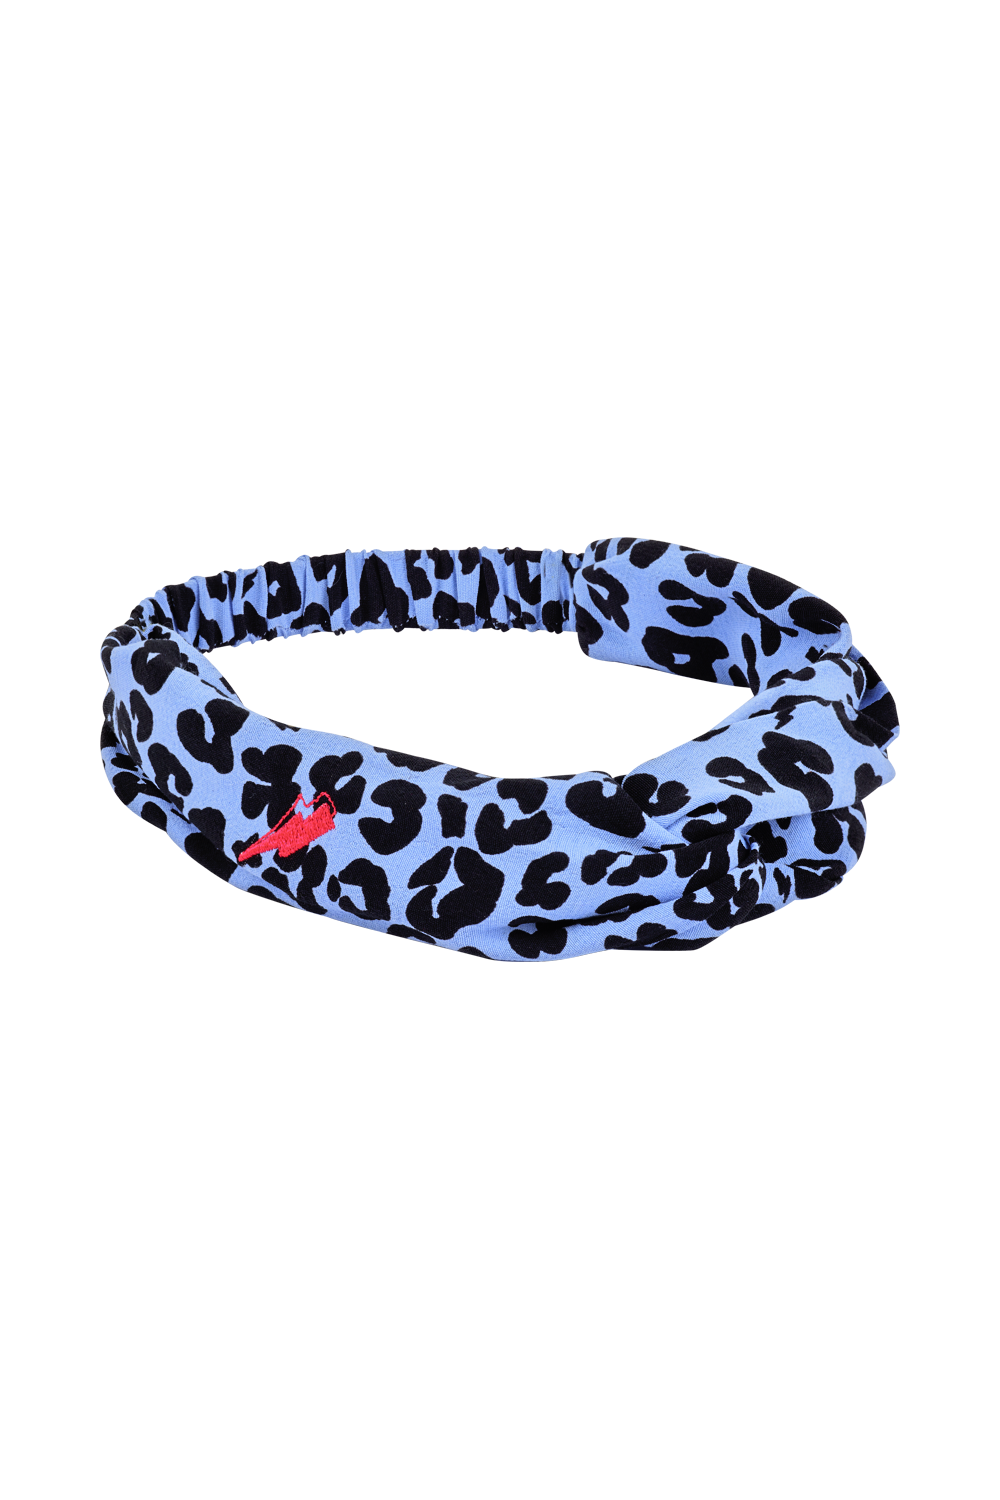 Soft Blue with Black Floral Leopard Headband